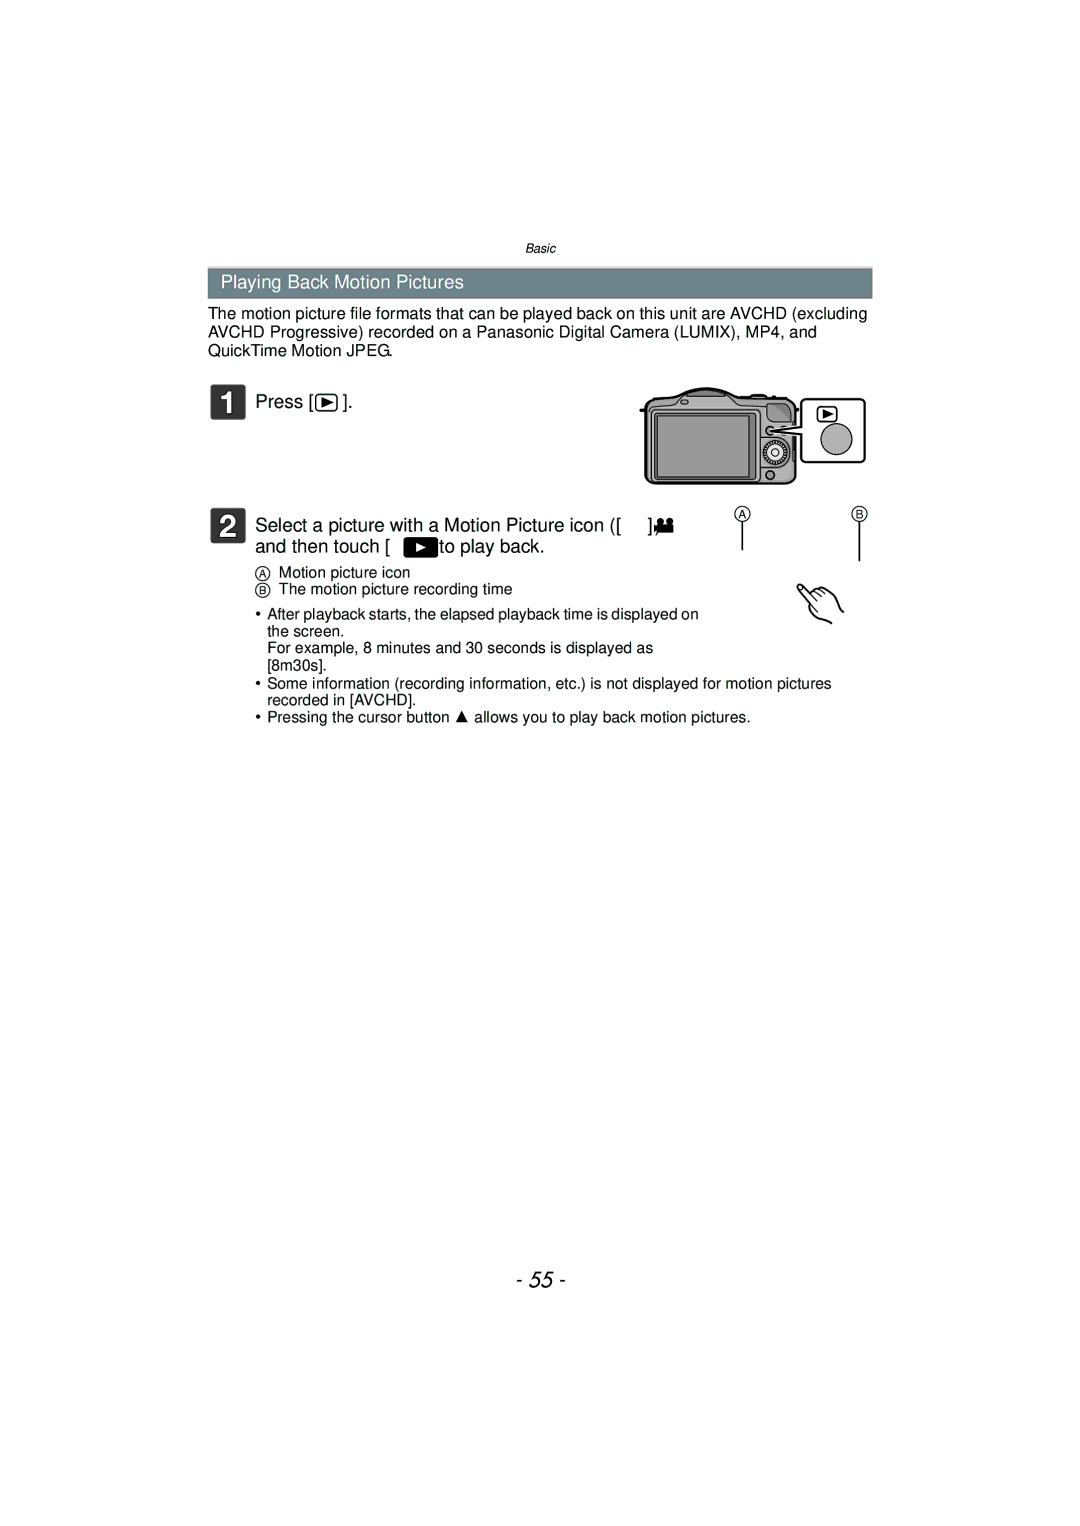 Panasonic DMC-GF5 owner manual Playing Back Motion Pictures 